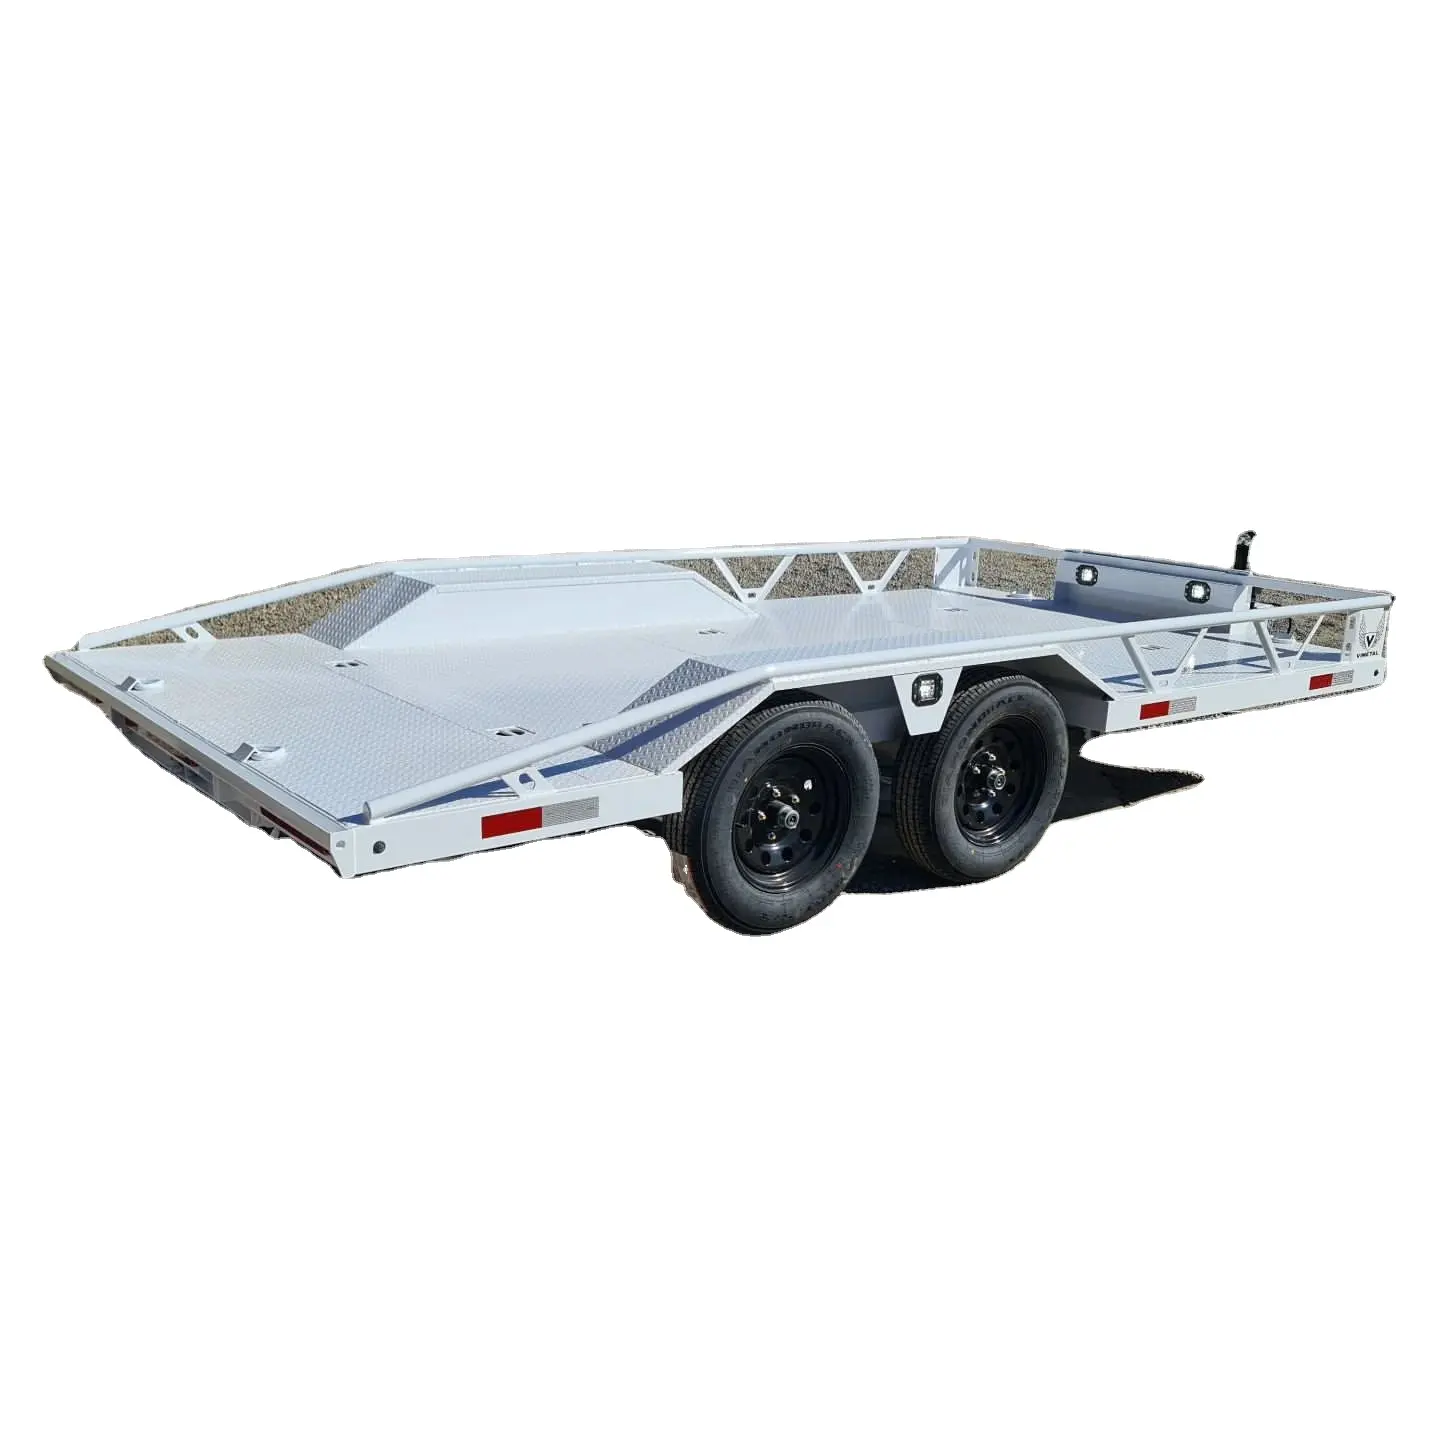 Quality Trailer For Small Cars, ATV, Bikes, Boat And More